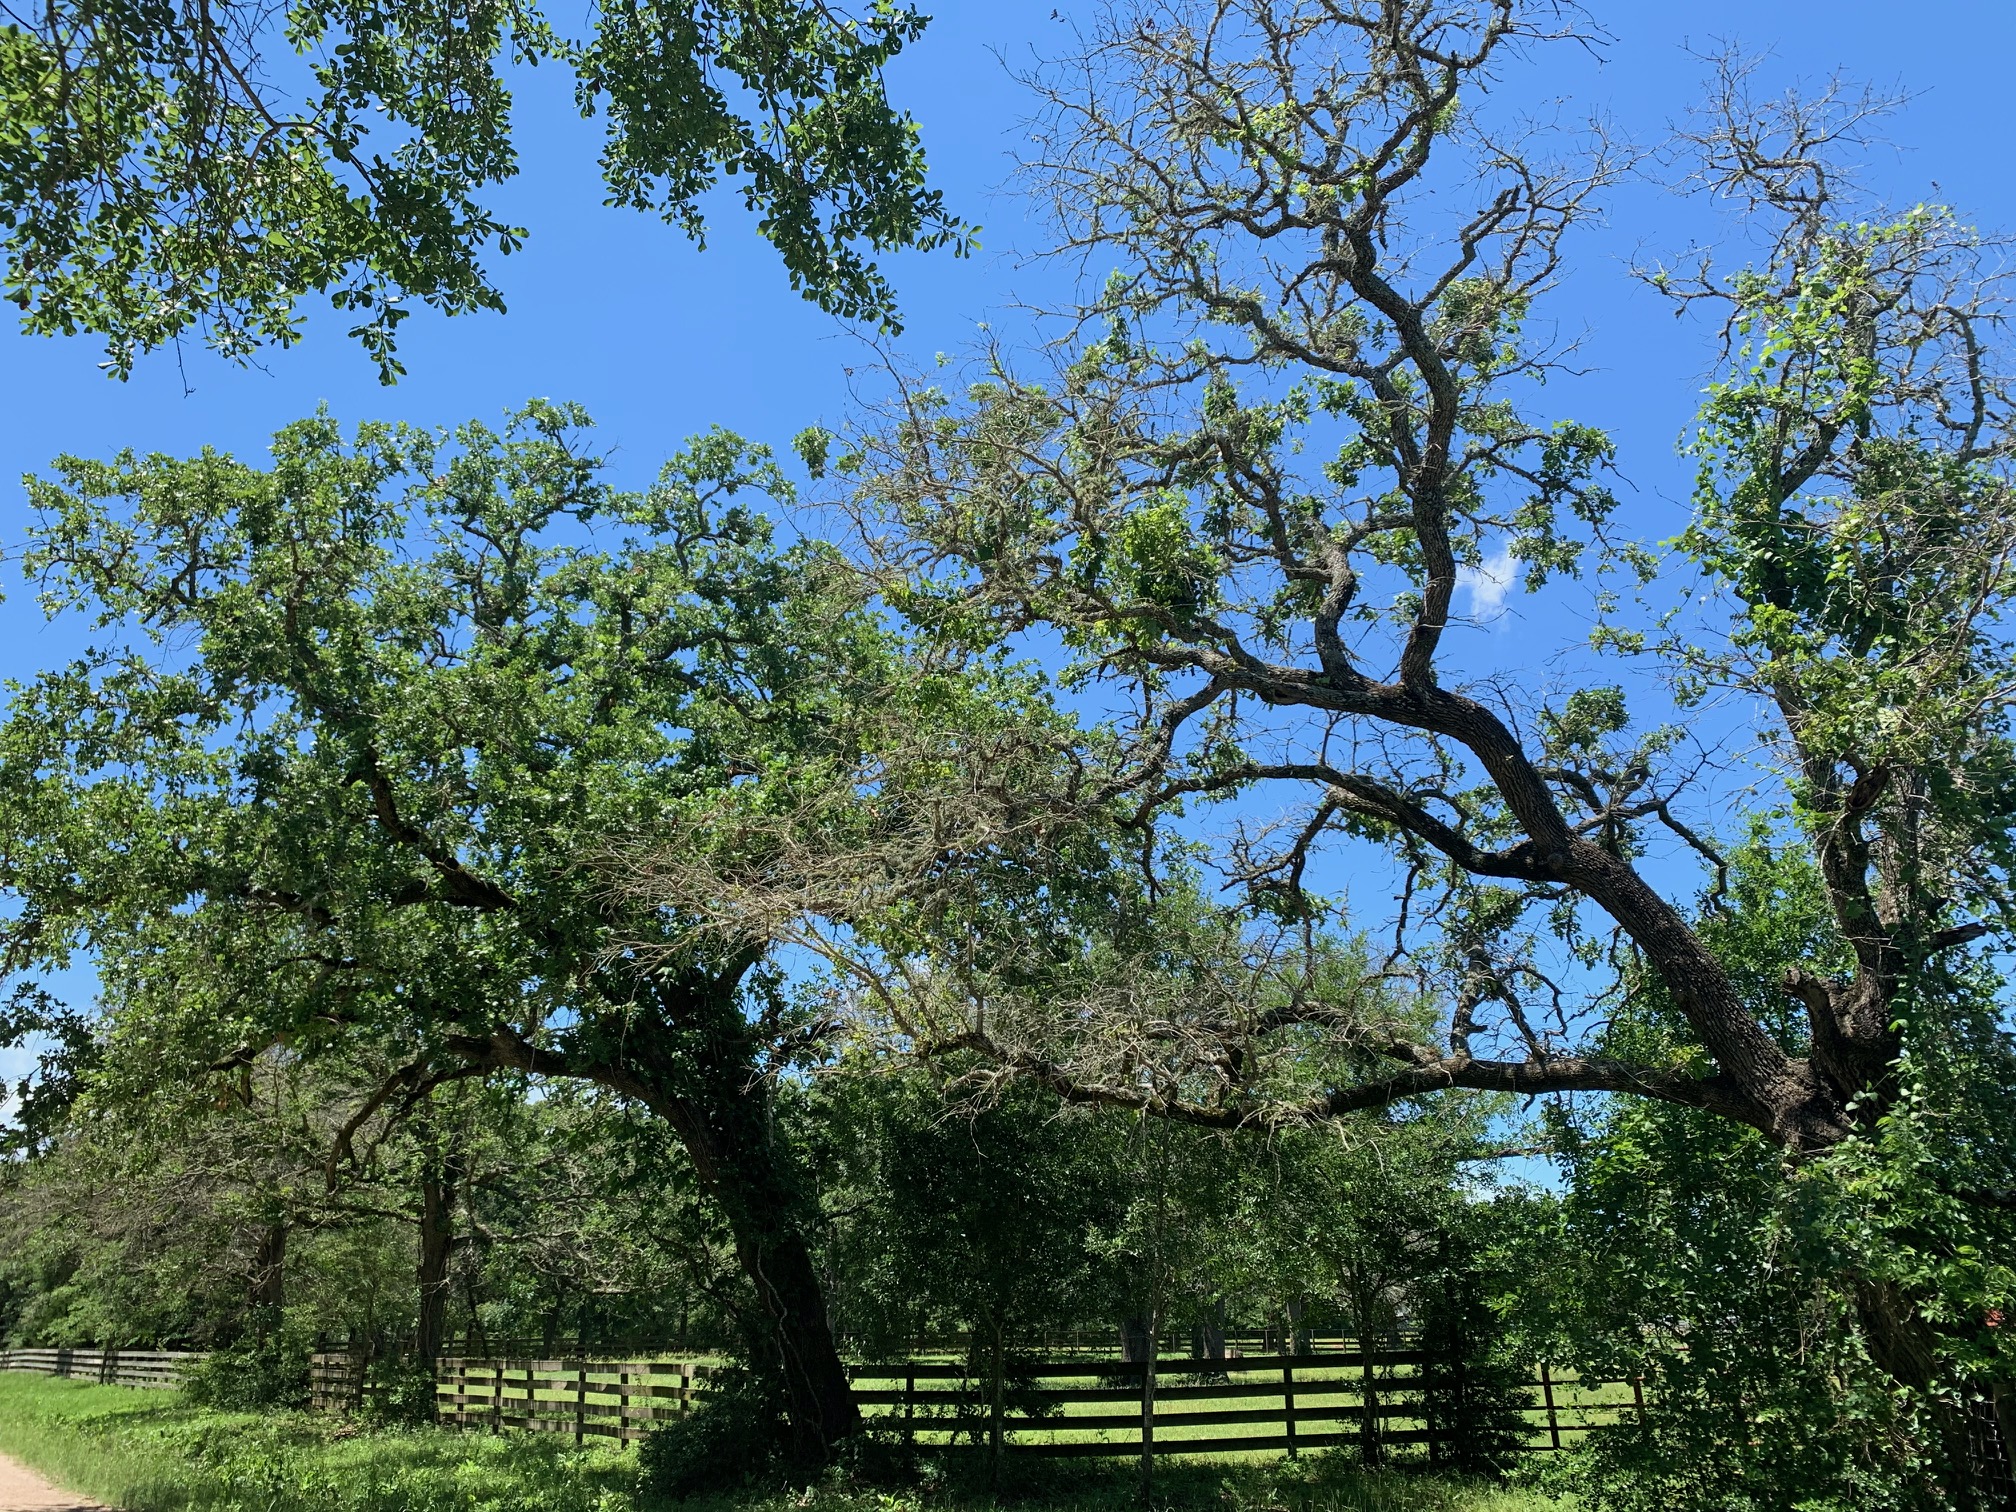 Oak trees in front of a fenc